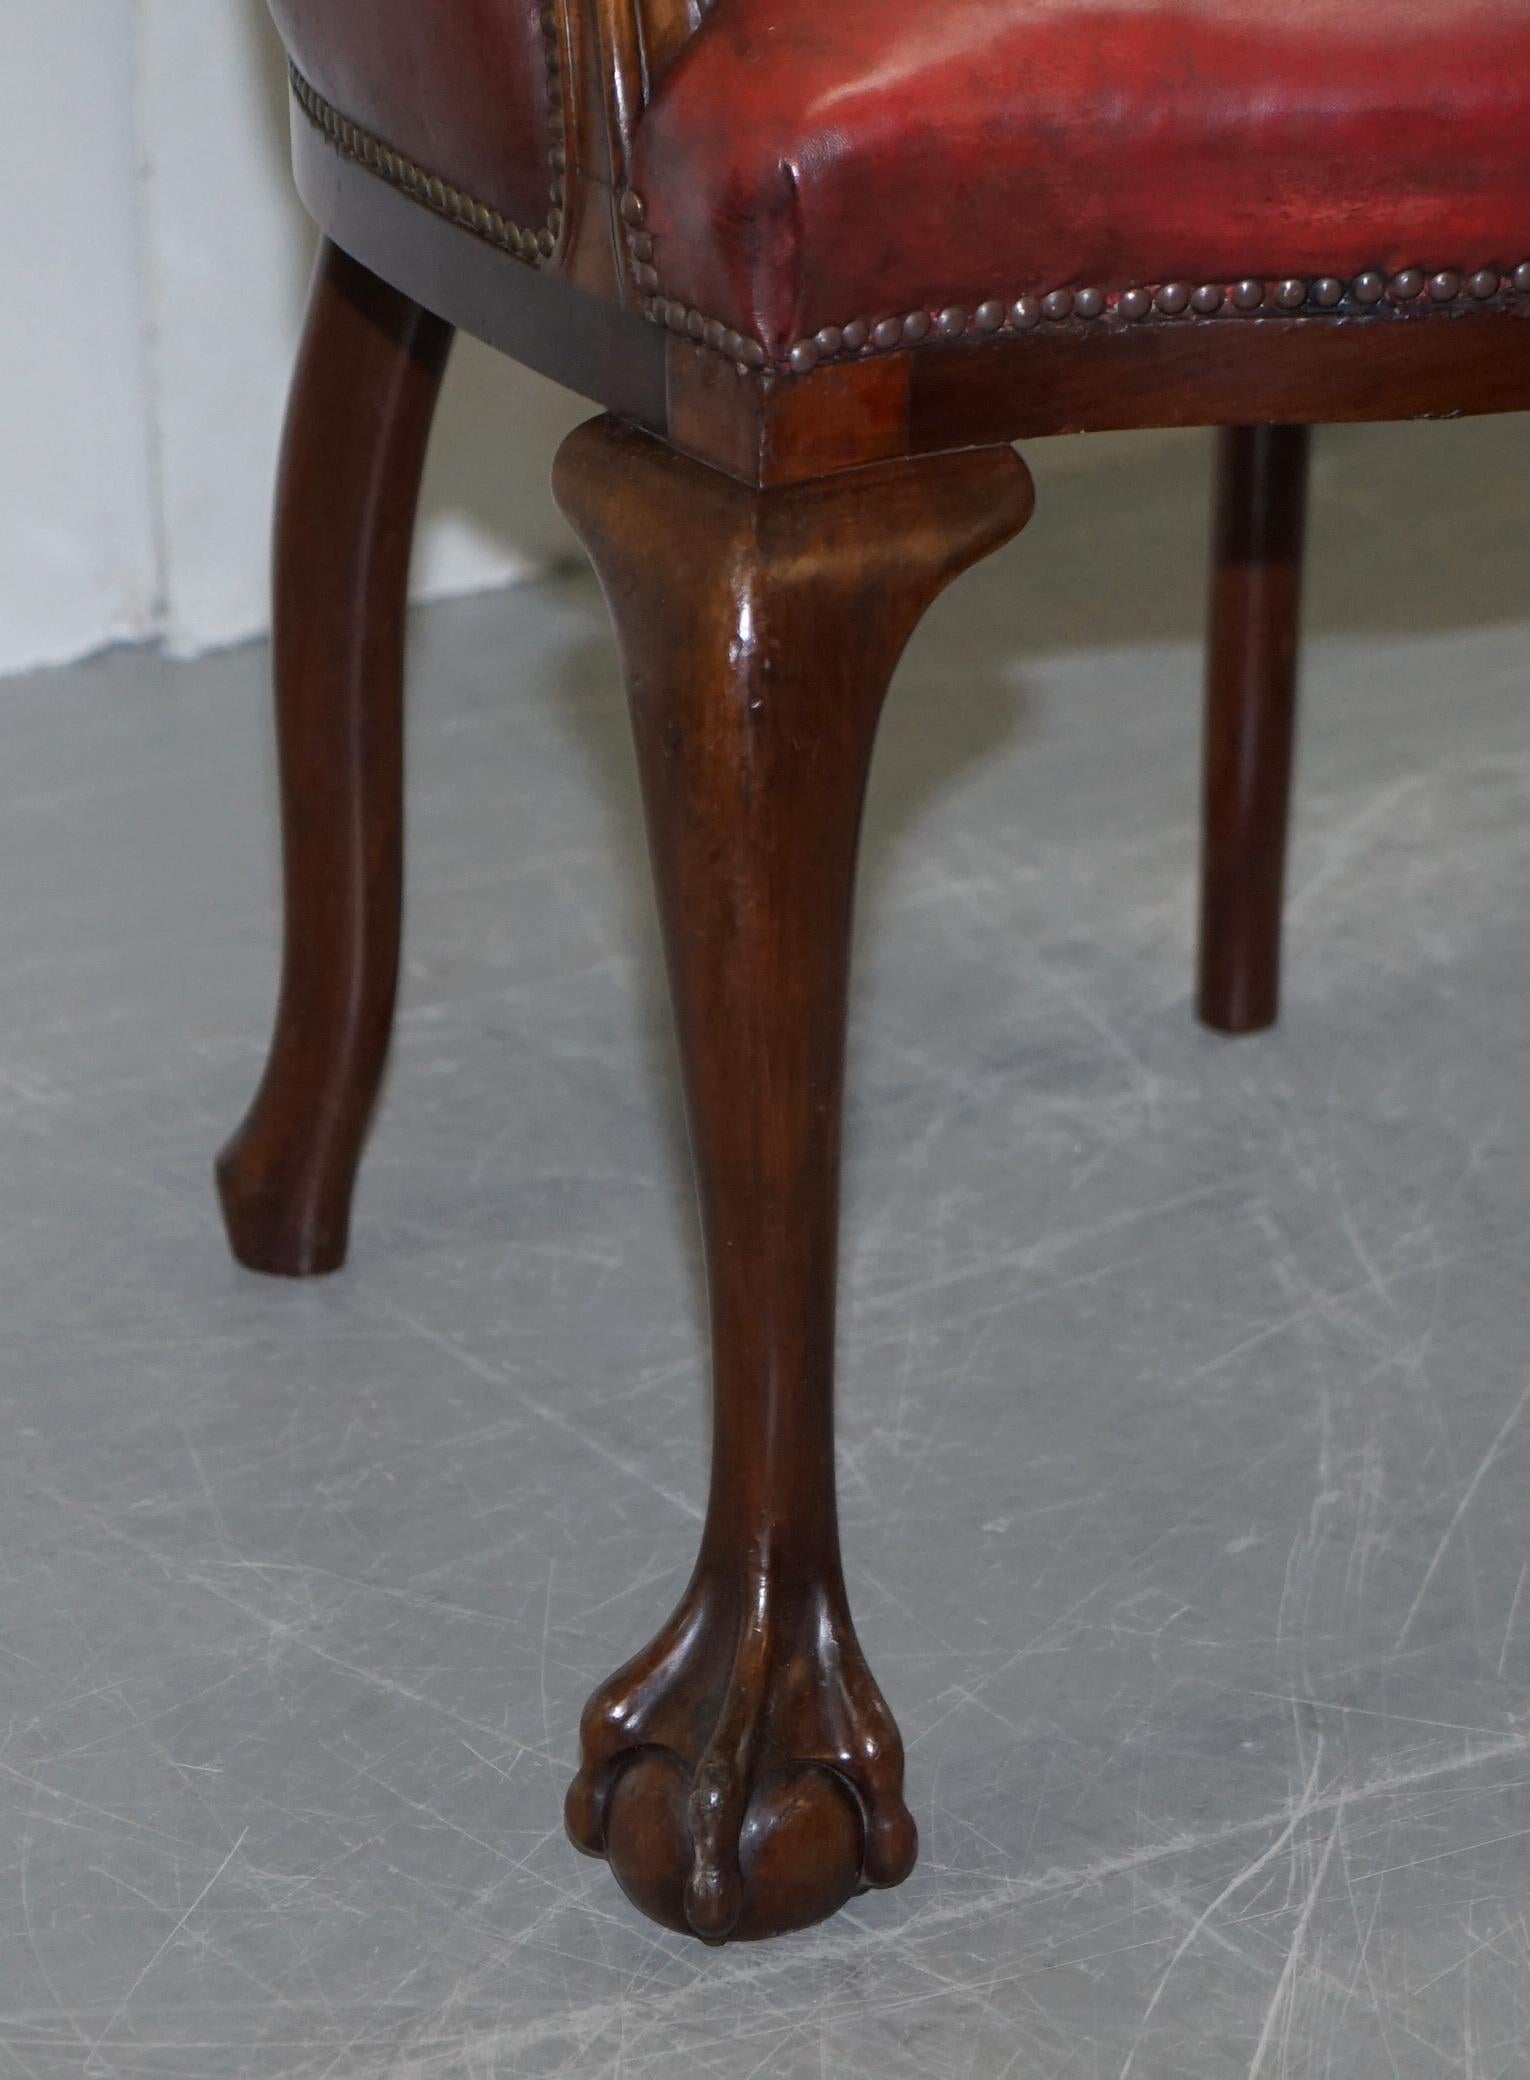 English Claw & Ball Cabriolet Leg Oxblood Leather Small Chair or Stool Office or Desk